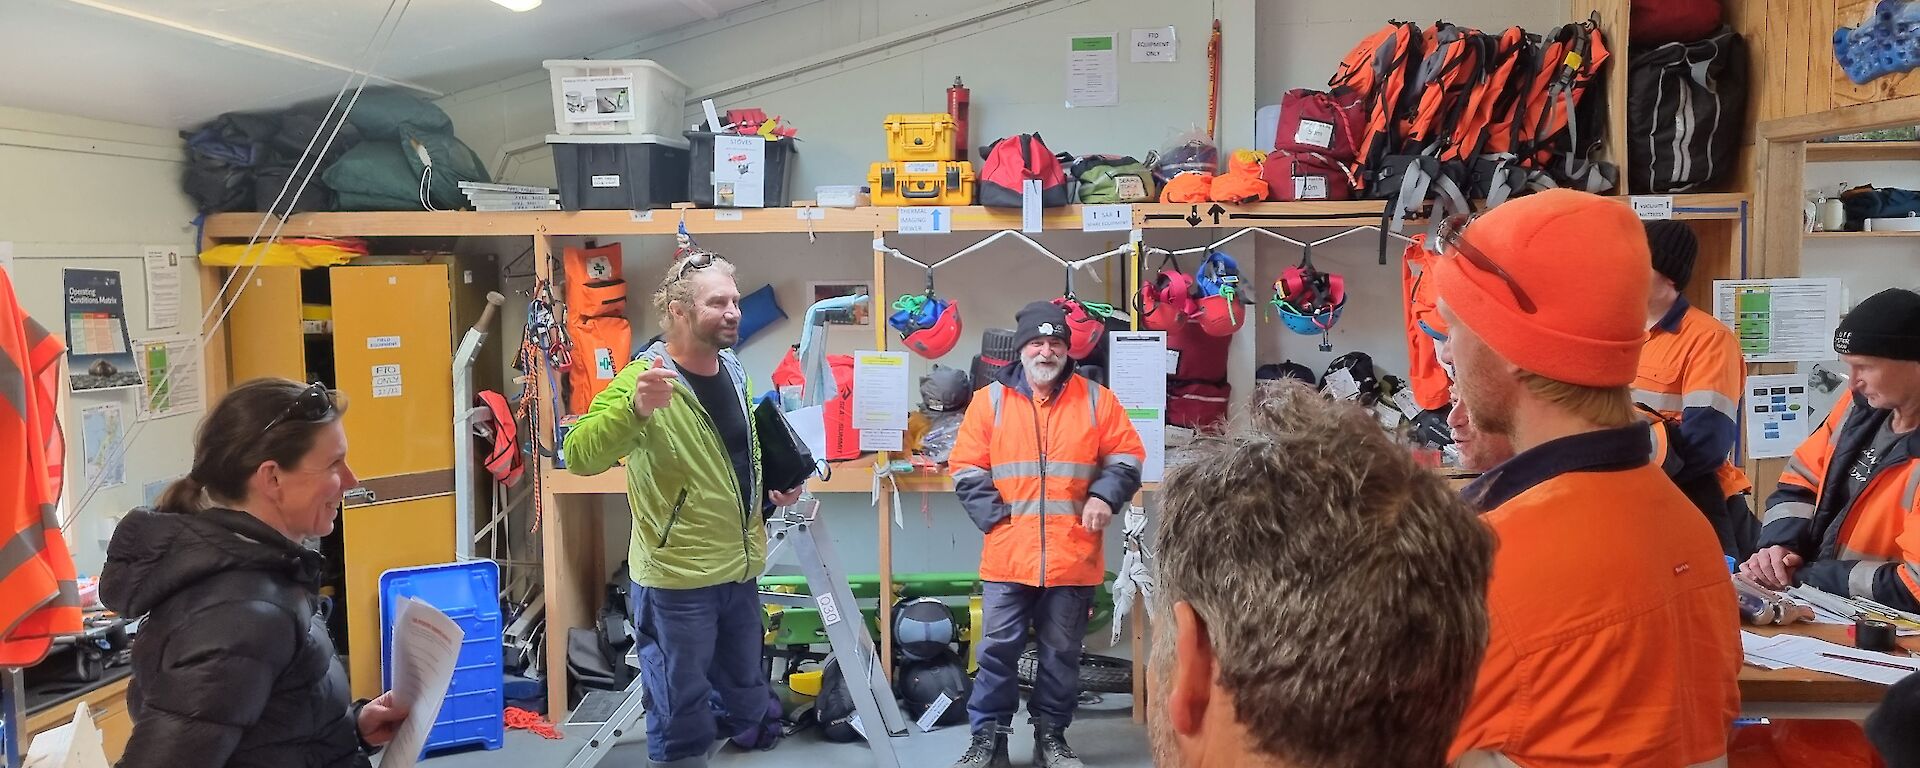 A group of people in a warehouse are taught how to use safety gear